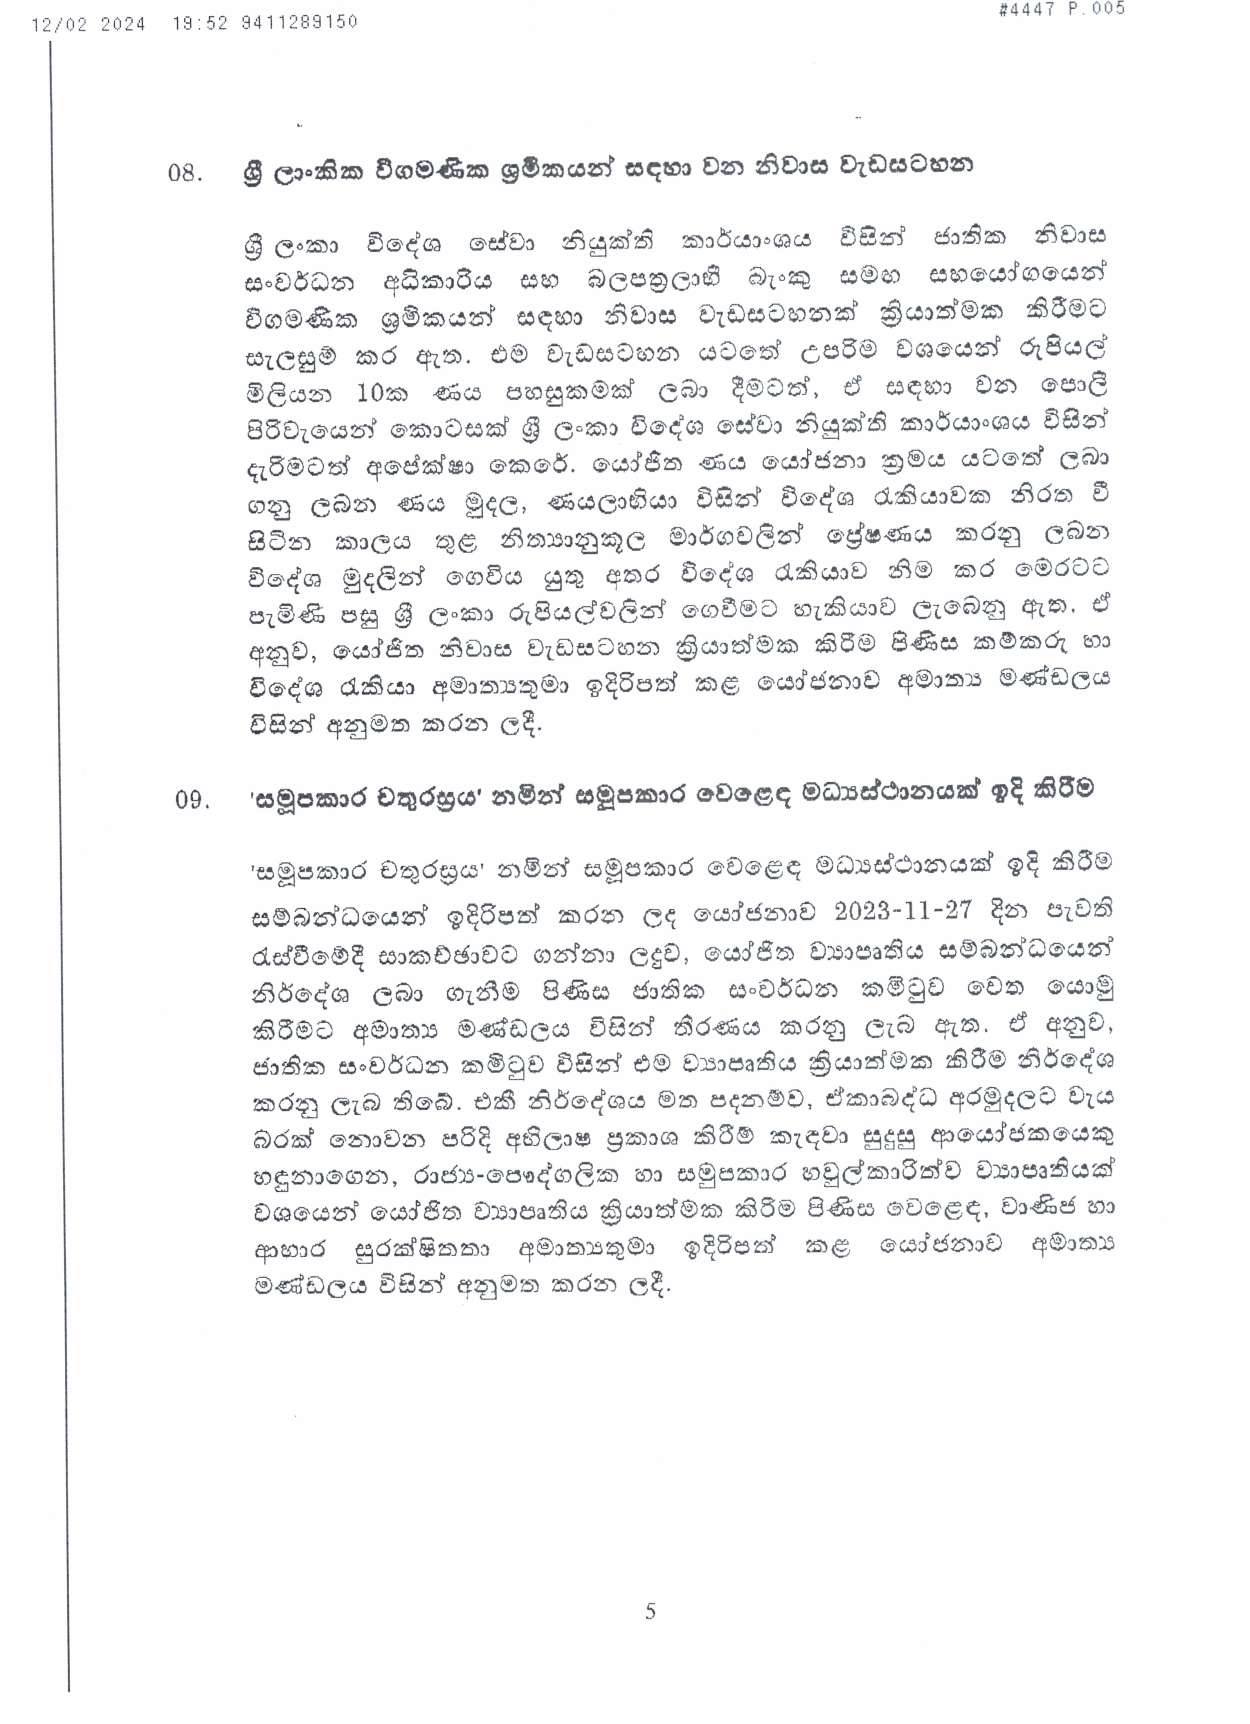 Cabient Decision on 12.02.2024 1 page 0005